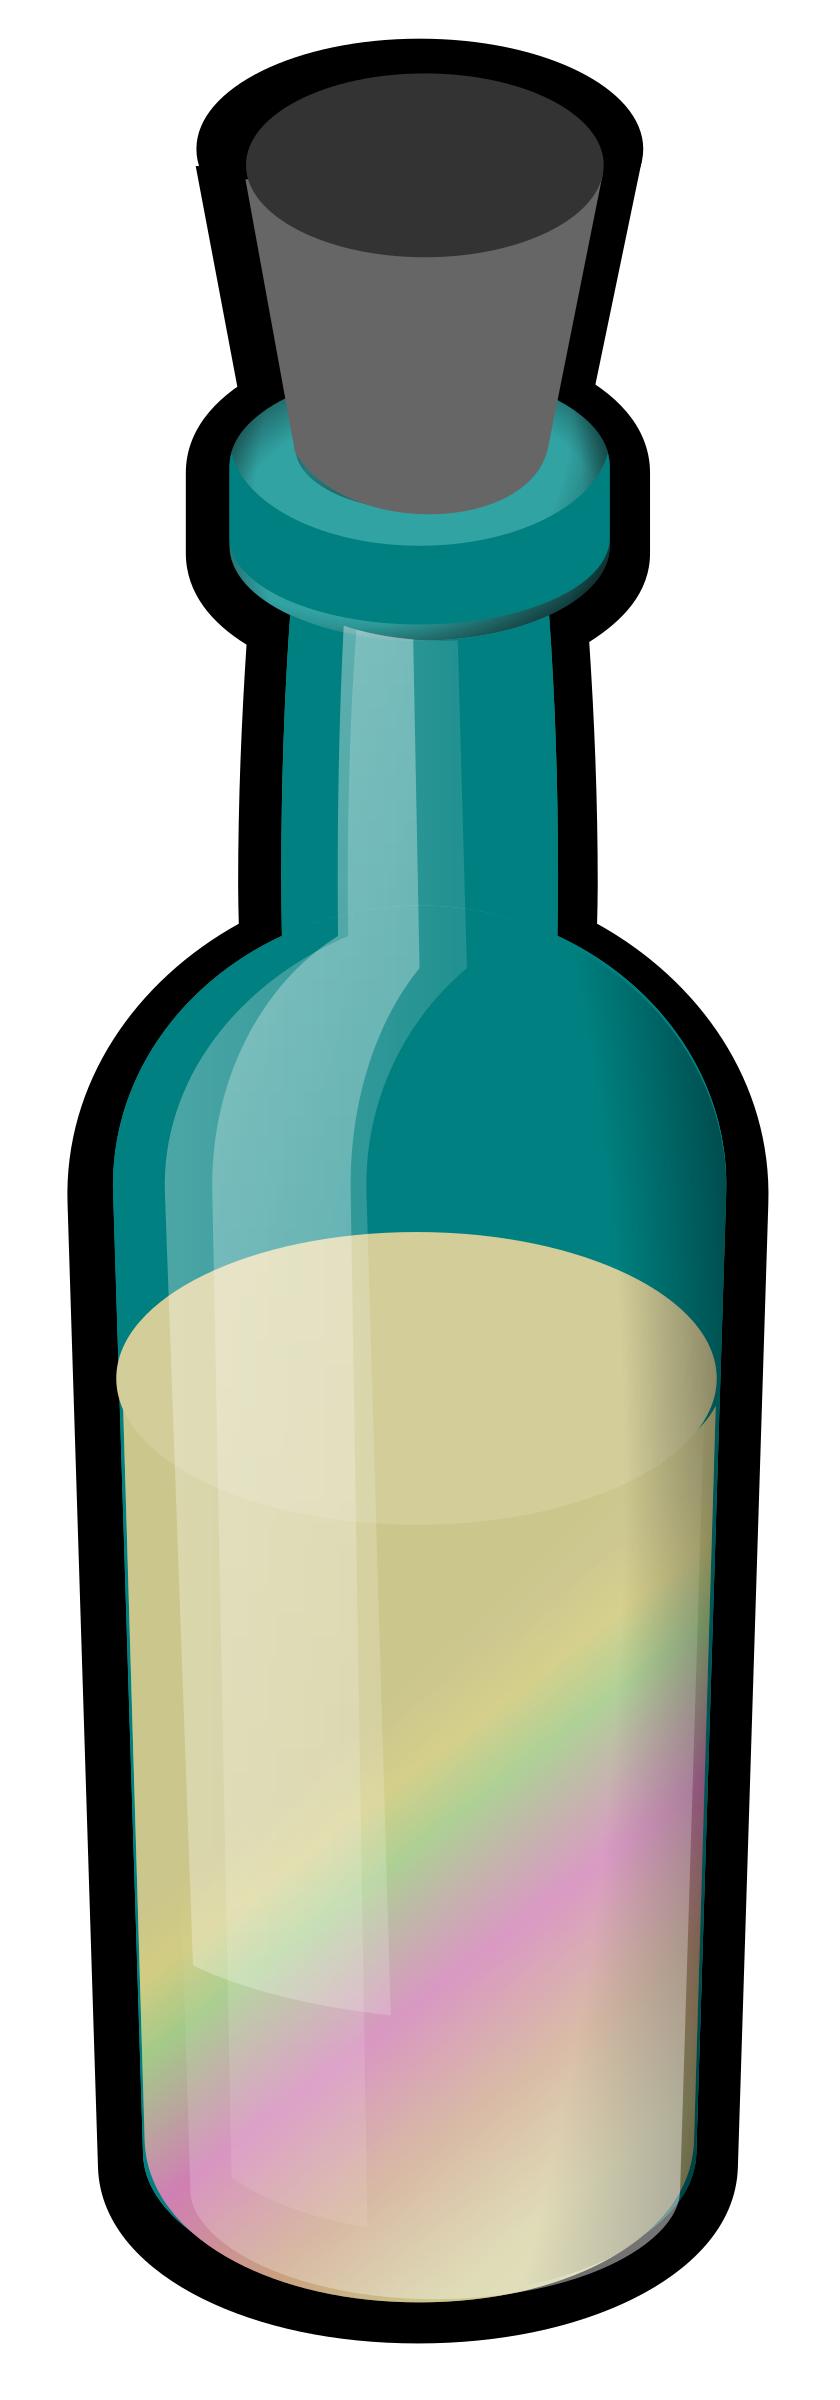 Bottle of Colored Sand png